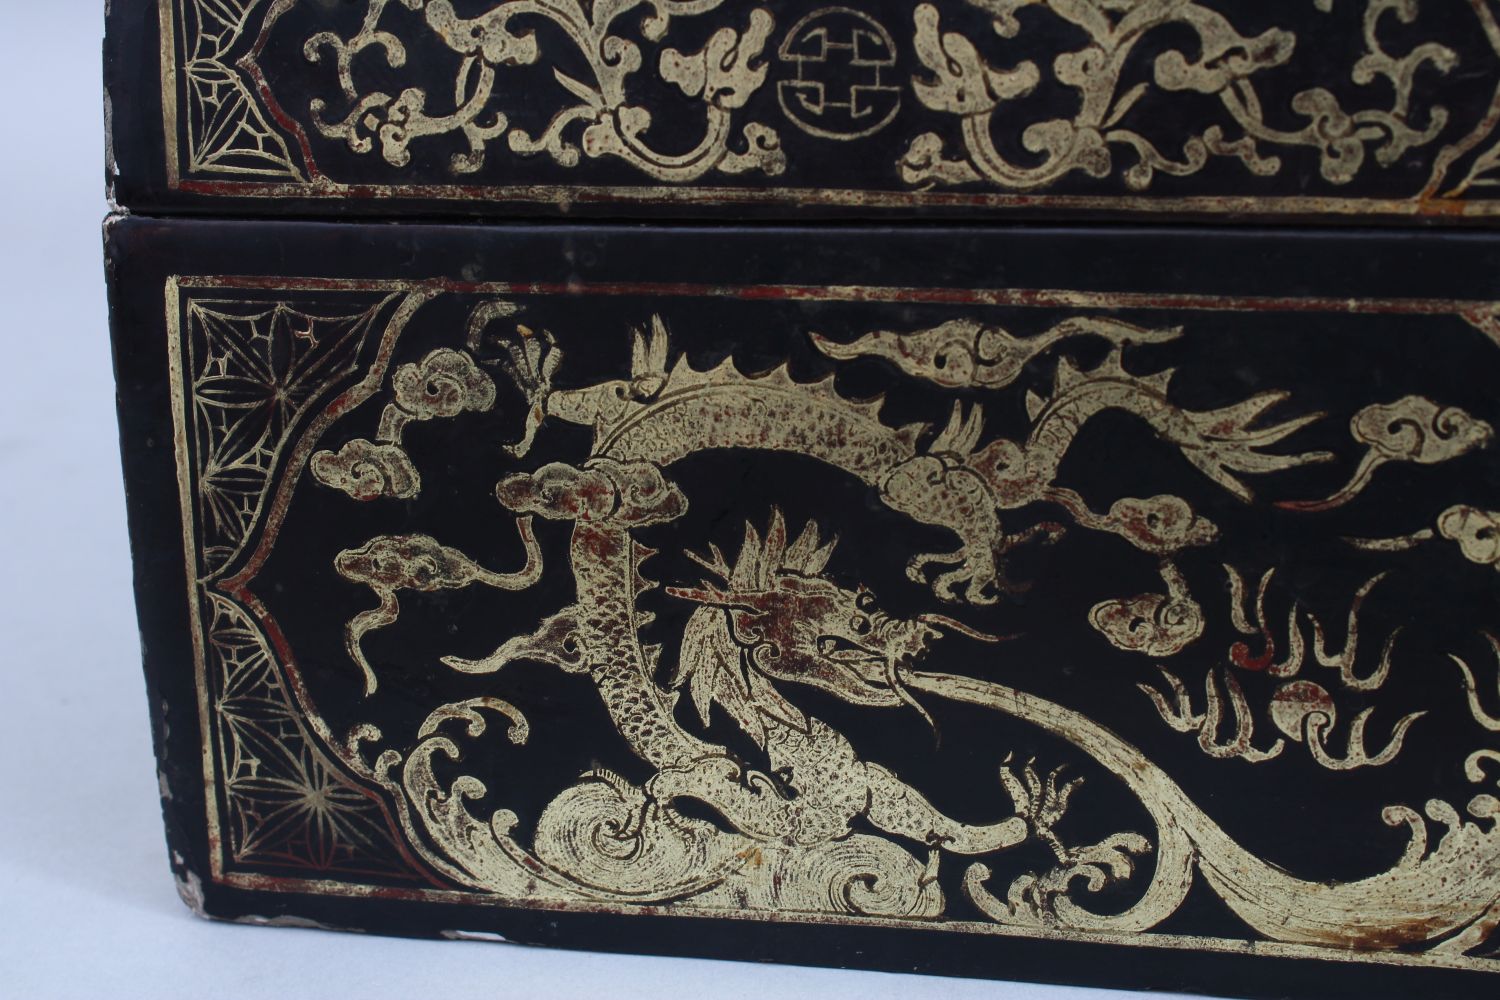 A GOOD 19TH CENTURY CHINESE LACQUER CHEST / BOX, the lacquer box with gilded decoration of dragons - Image 4 of 12